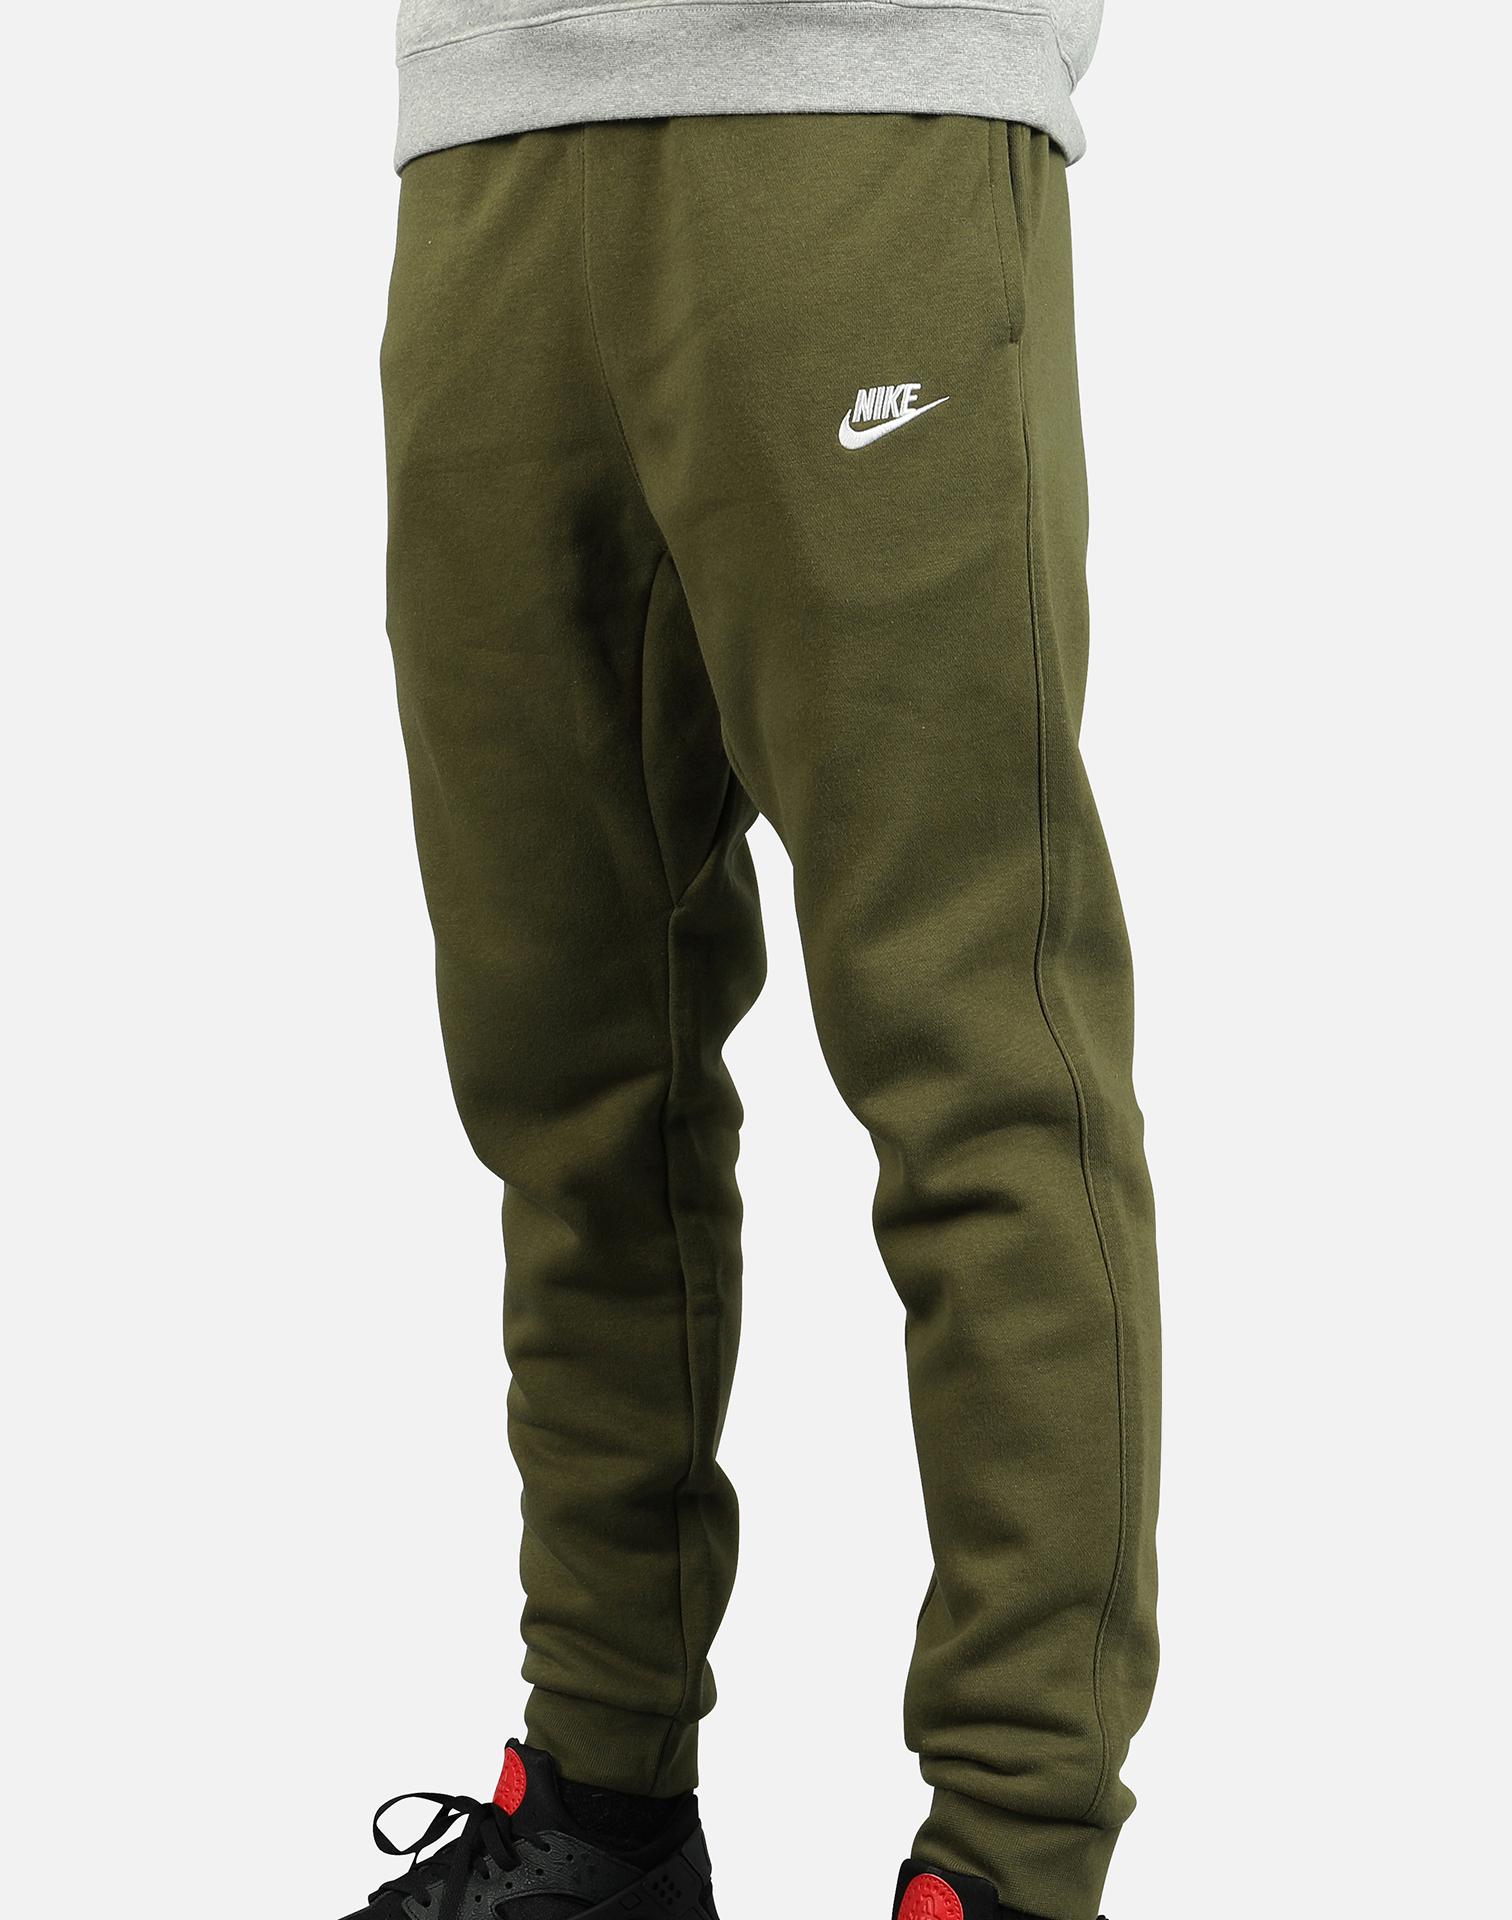 Olive Green Nike Joggers France, SAVE 51% - mpgc.net